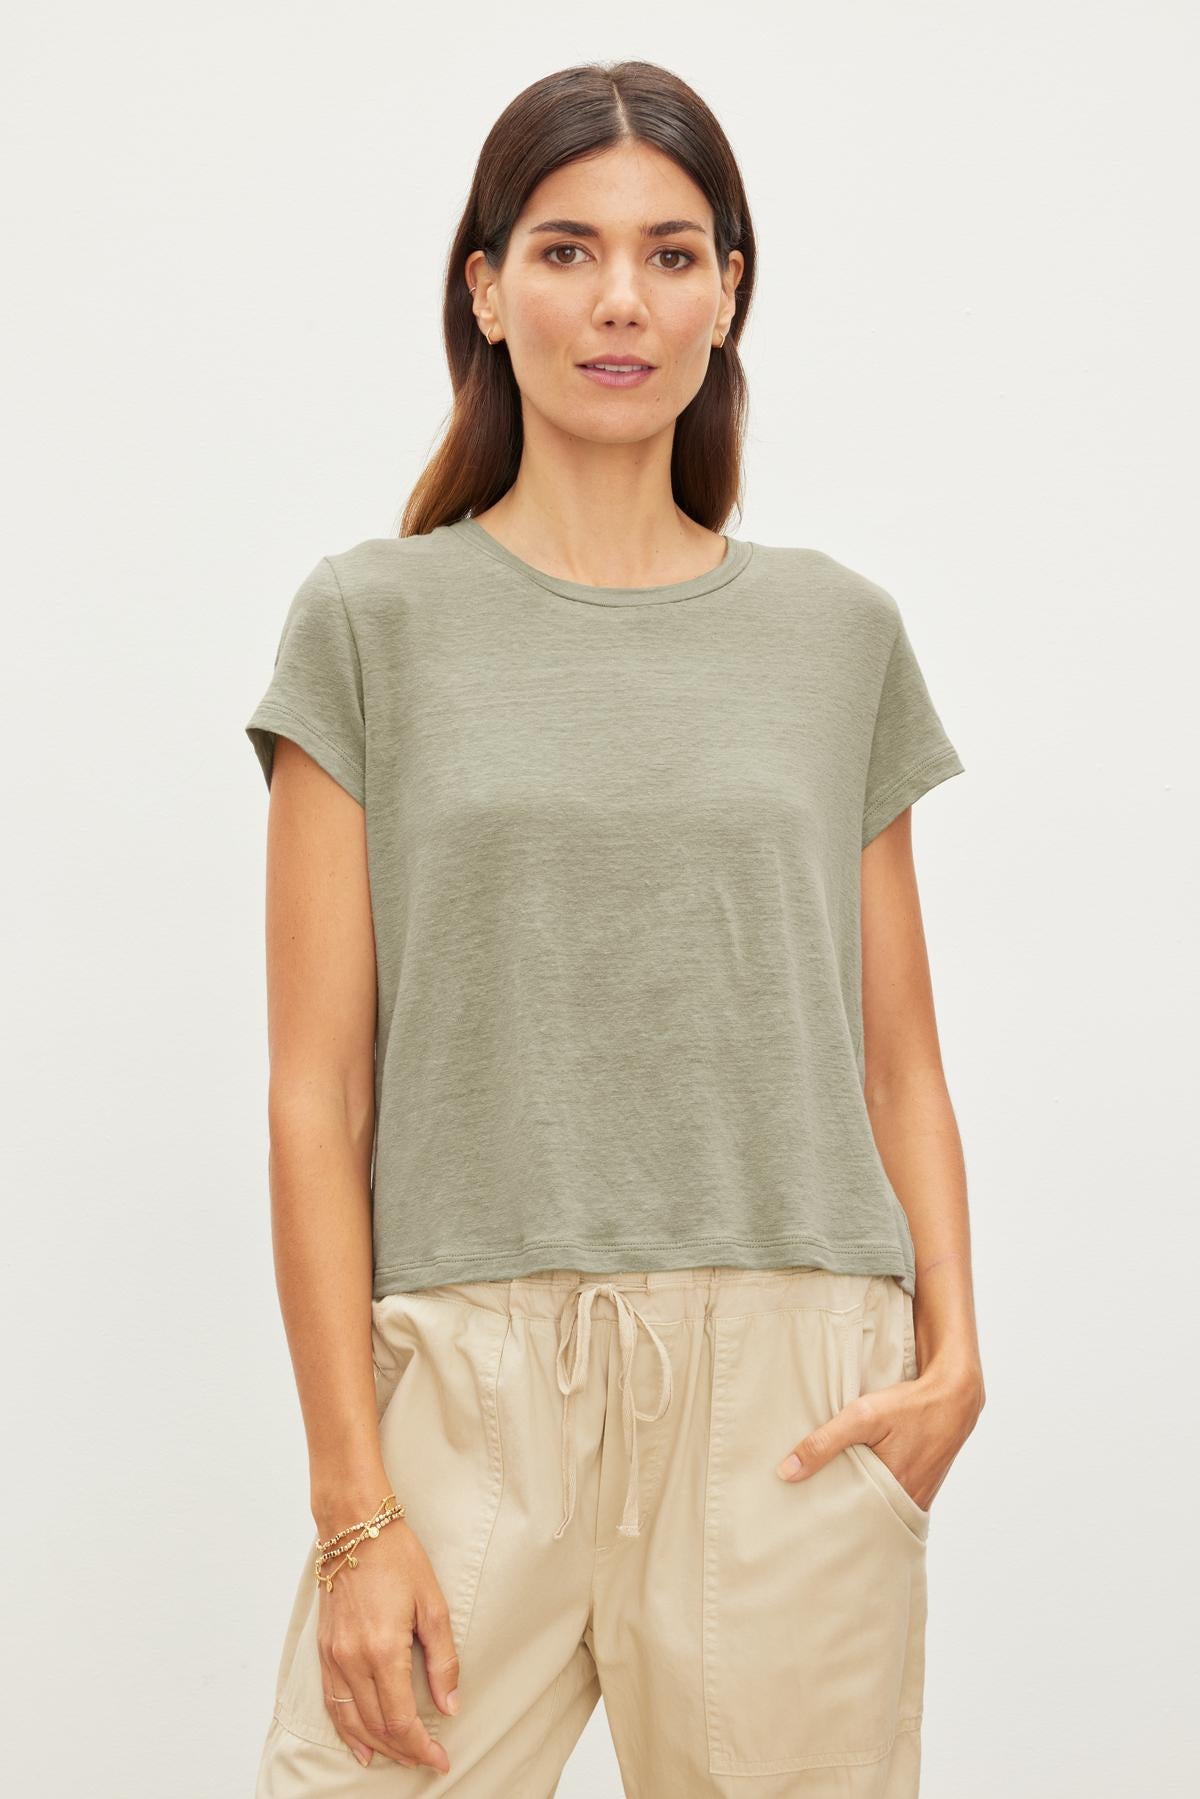 A woman wearing a green Velvet by Graham & Spencer CASEY LINEN KNIT CREW NECK TEE and beige drawstring pants stands against a plain background, looking directly at the camera.-36909994049729